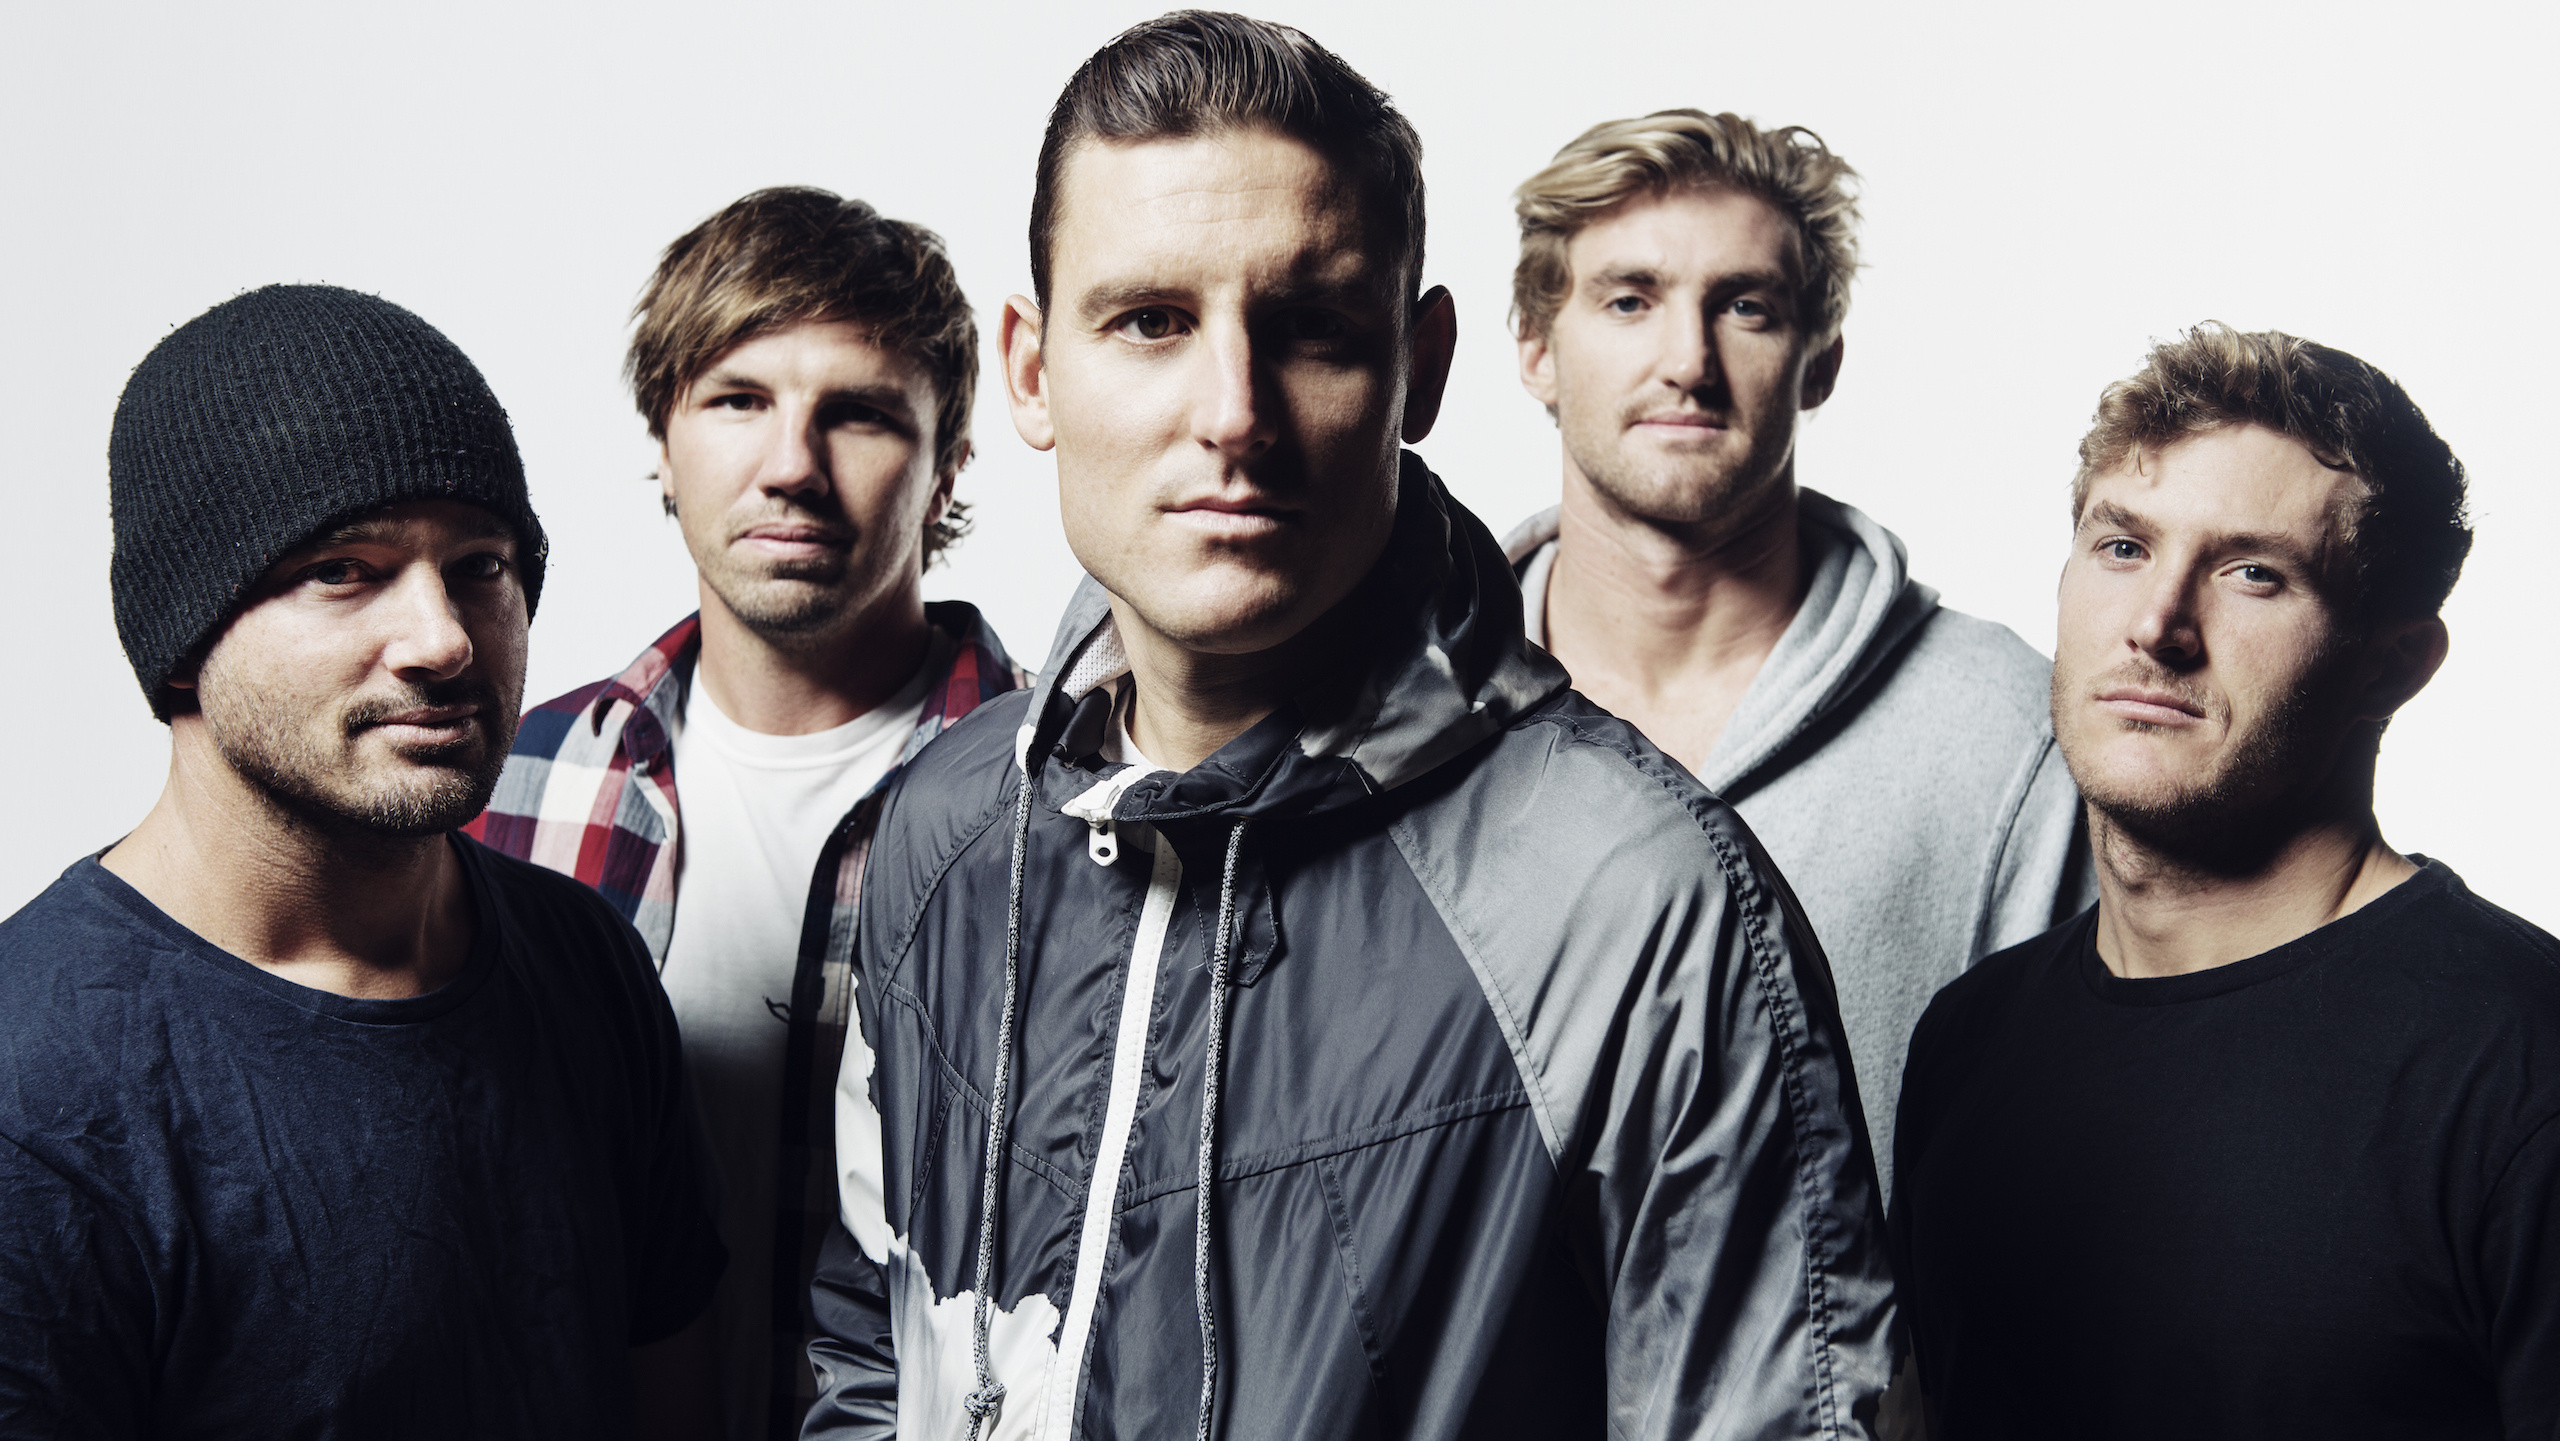 Parkway Drive, Music wallpapers, HQ pictures, 2019 4K images, 2560x1450 HD Desktop